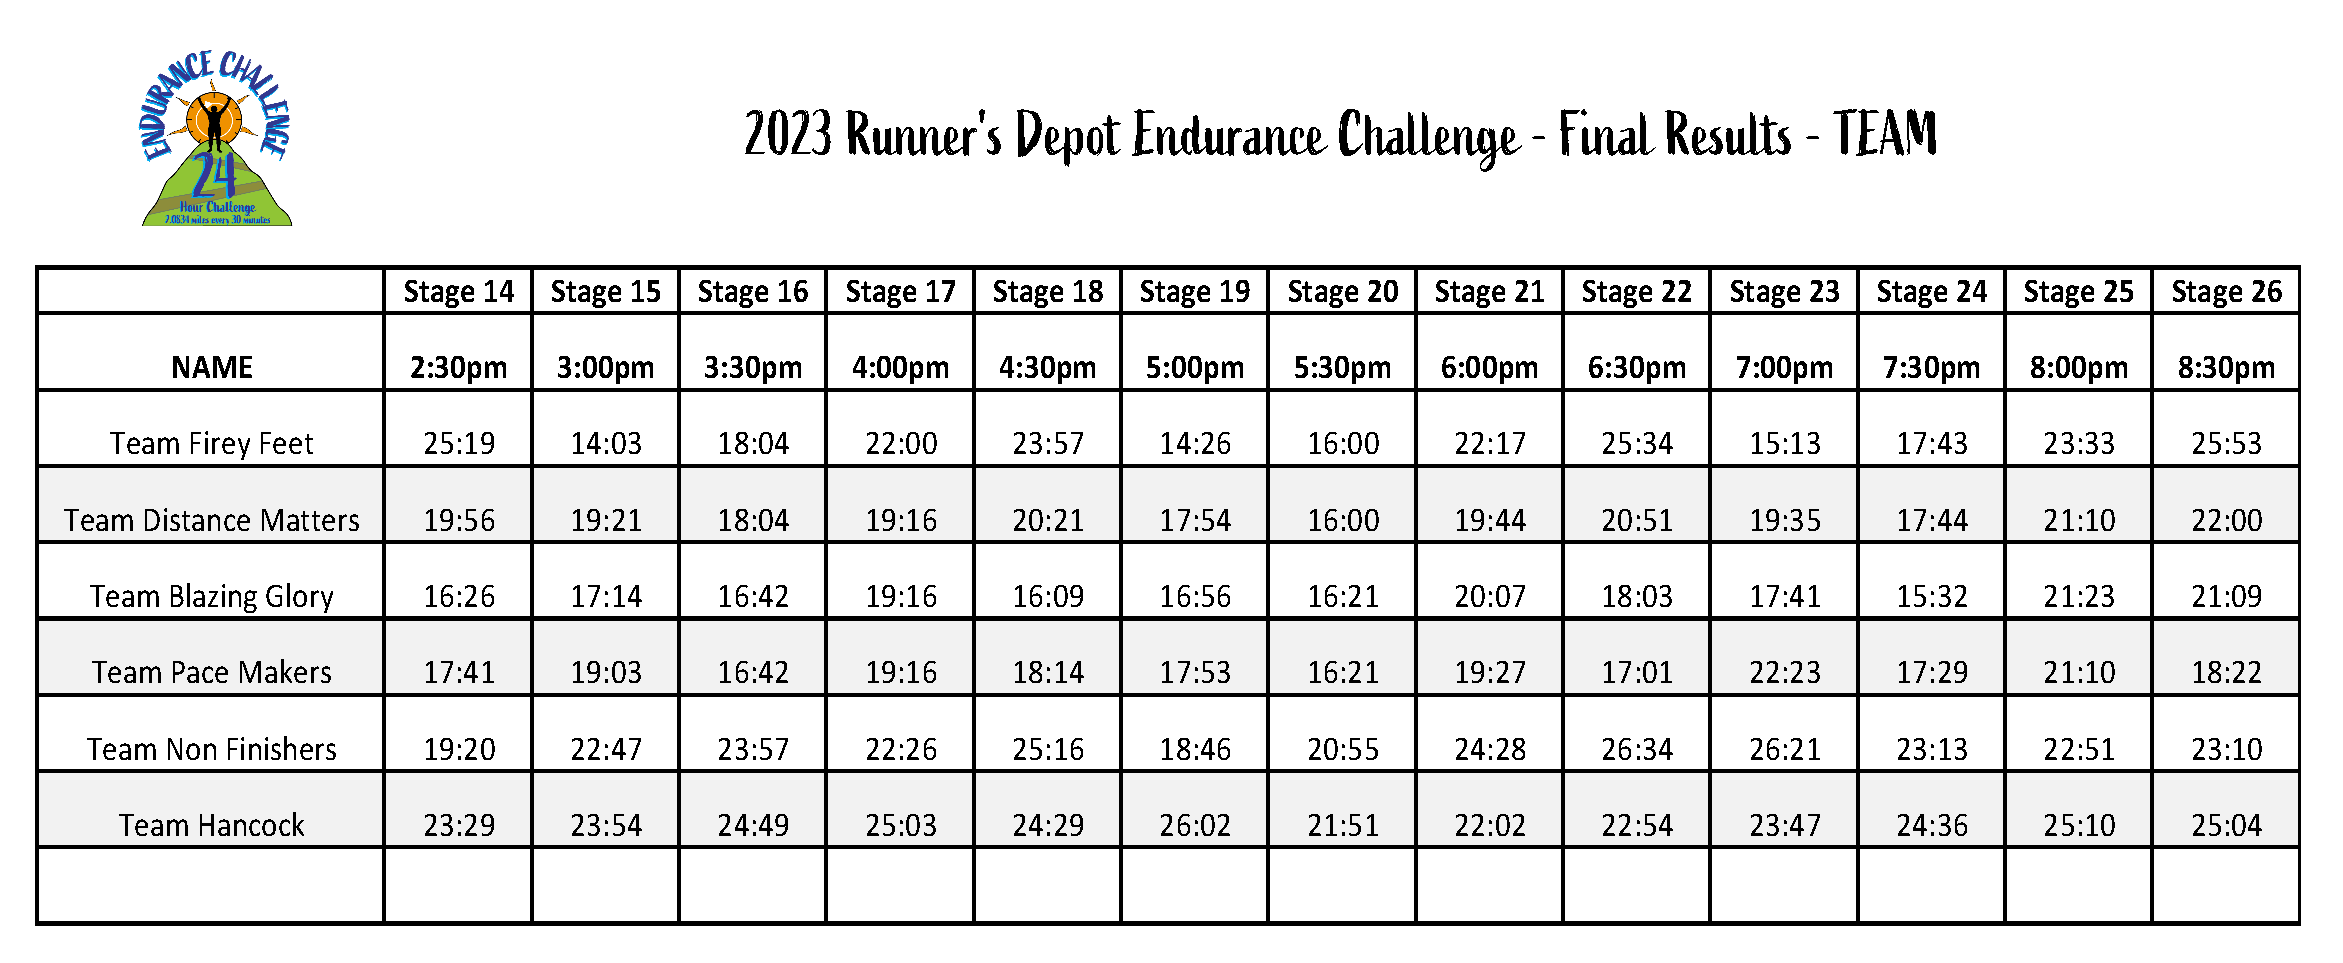 2023 Endurance Challenge_Team Results_230pm to 830pm